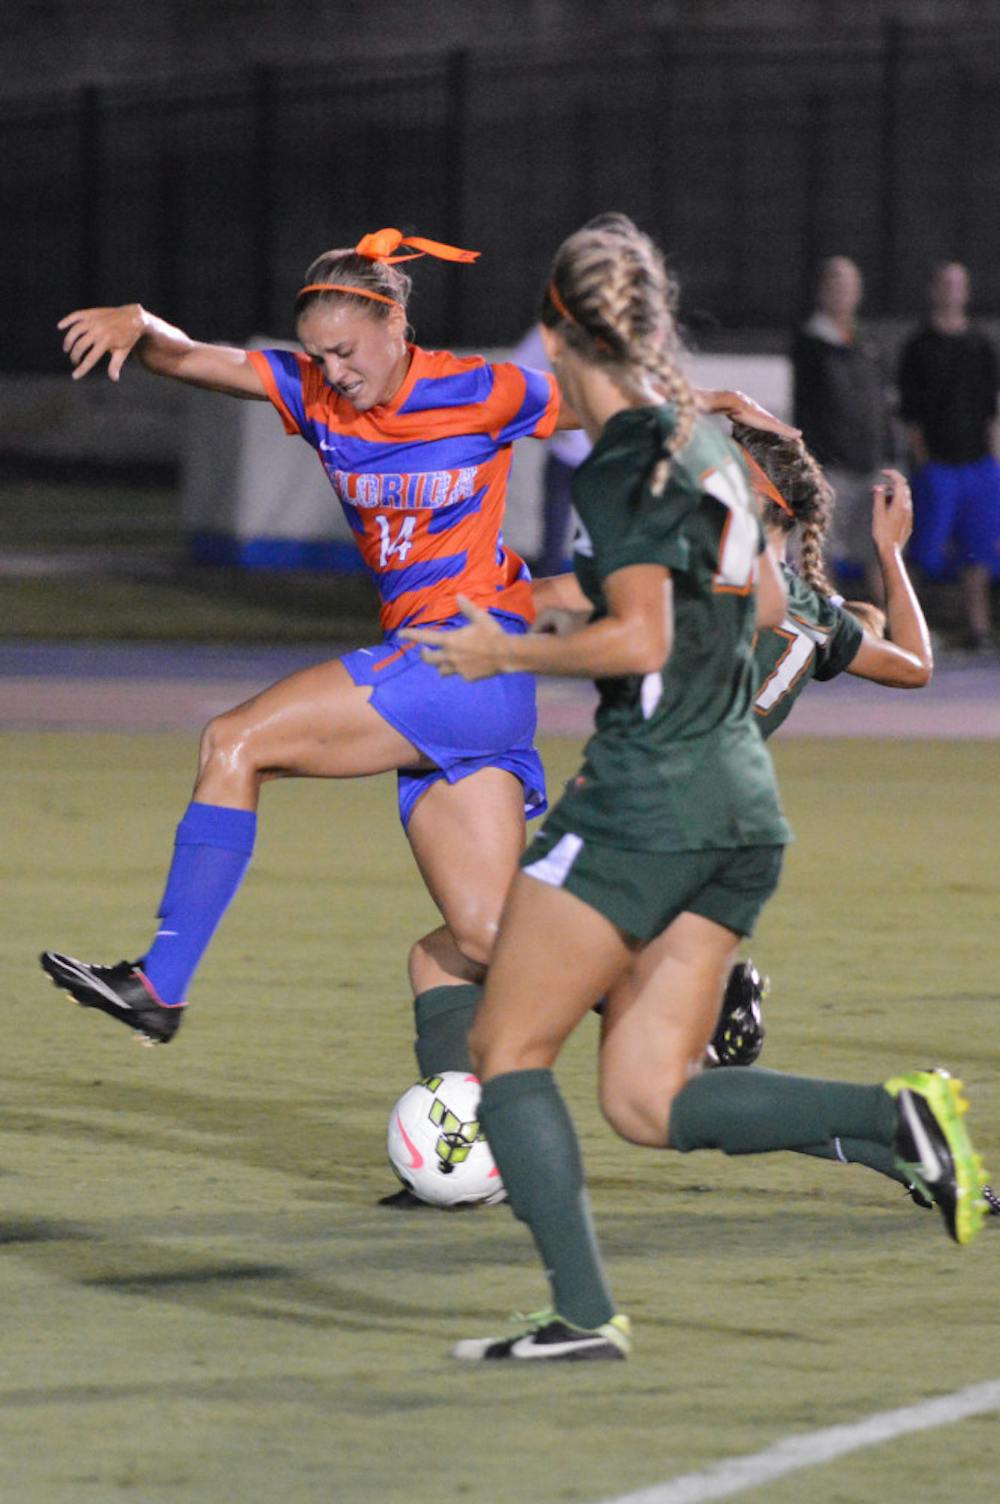 <p>Florida senior forward Jillian Graff fights for possession with two Miami players during the Gators' 3-0 win against the Hurricanes on Friday night at James G. Pressly Stadium. Graff scored the first two goals of the match.</p>